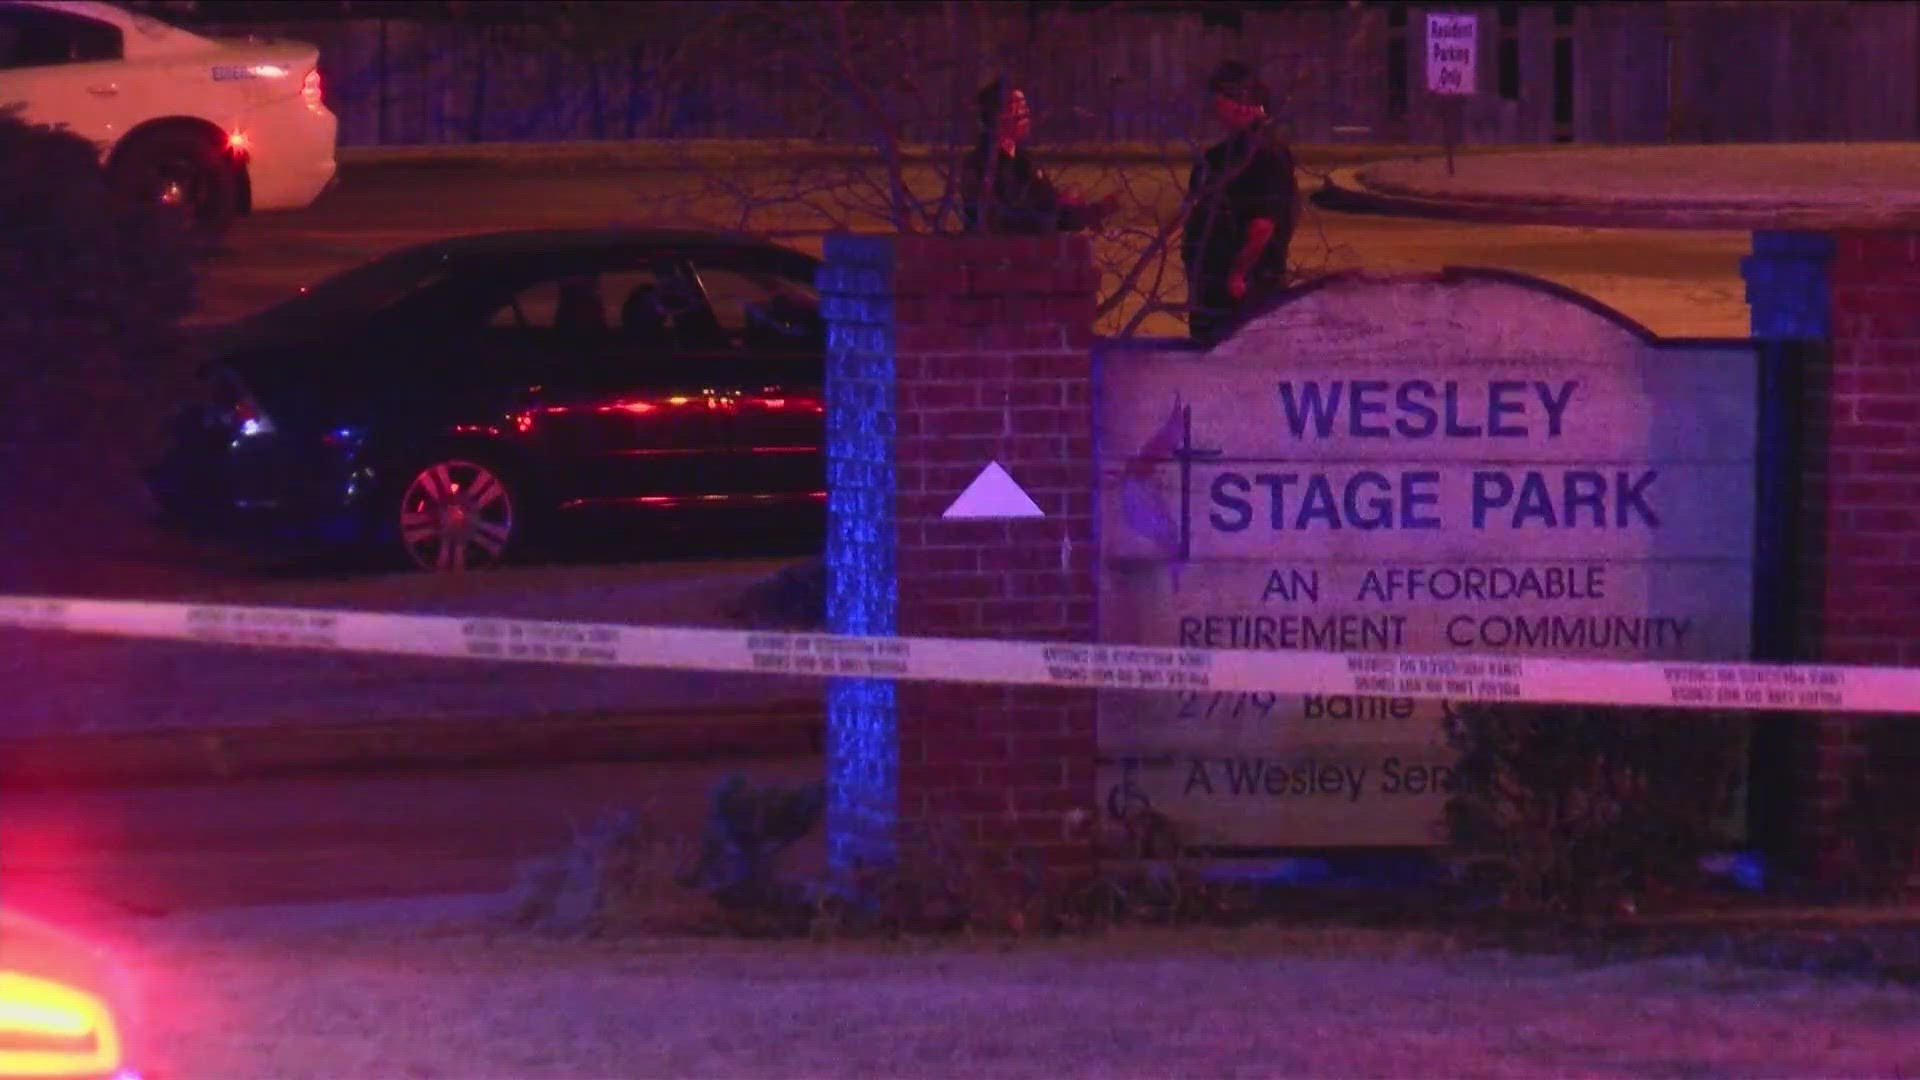 Memphis Police responded to the shooting just before 2:30 a.m. Friday, March 8, at the Wesley Stage Park retirement community center on Battle Creek Drive.